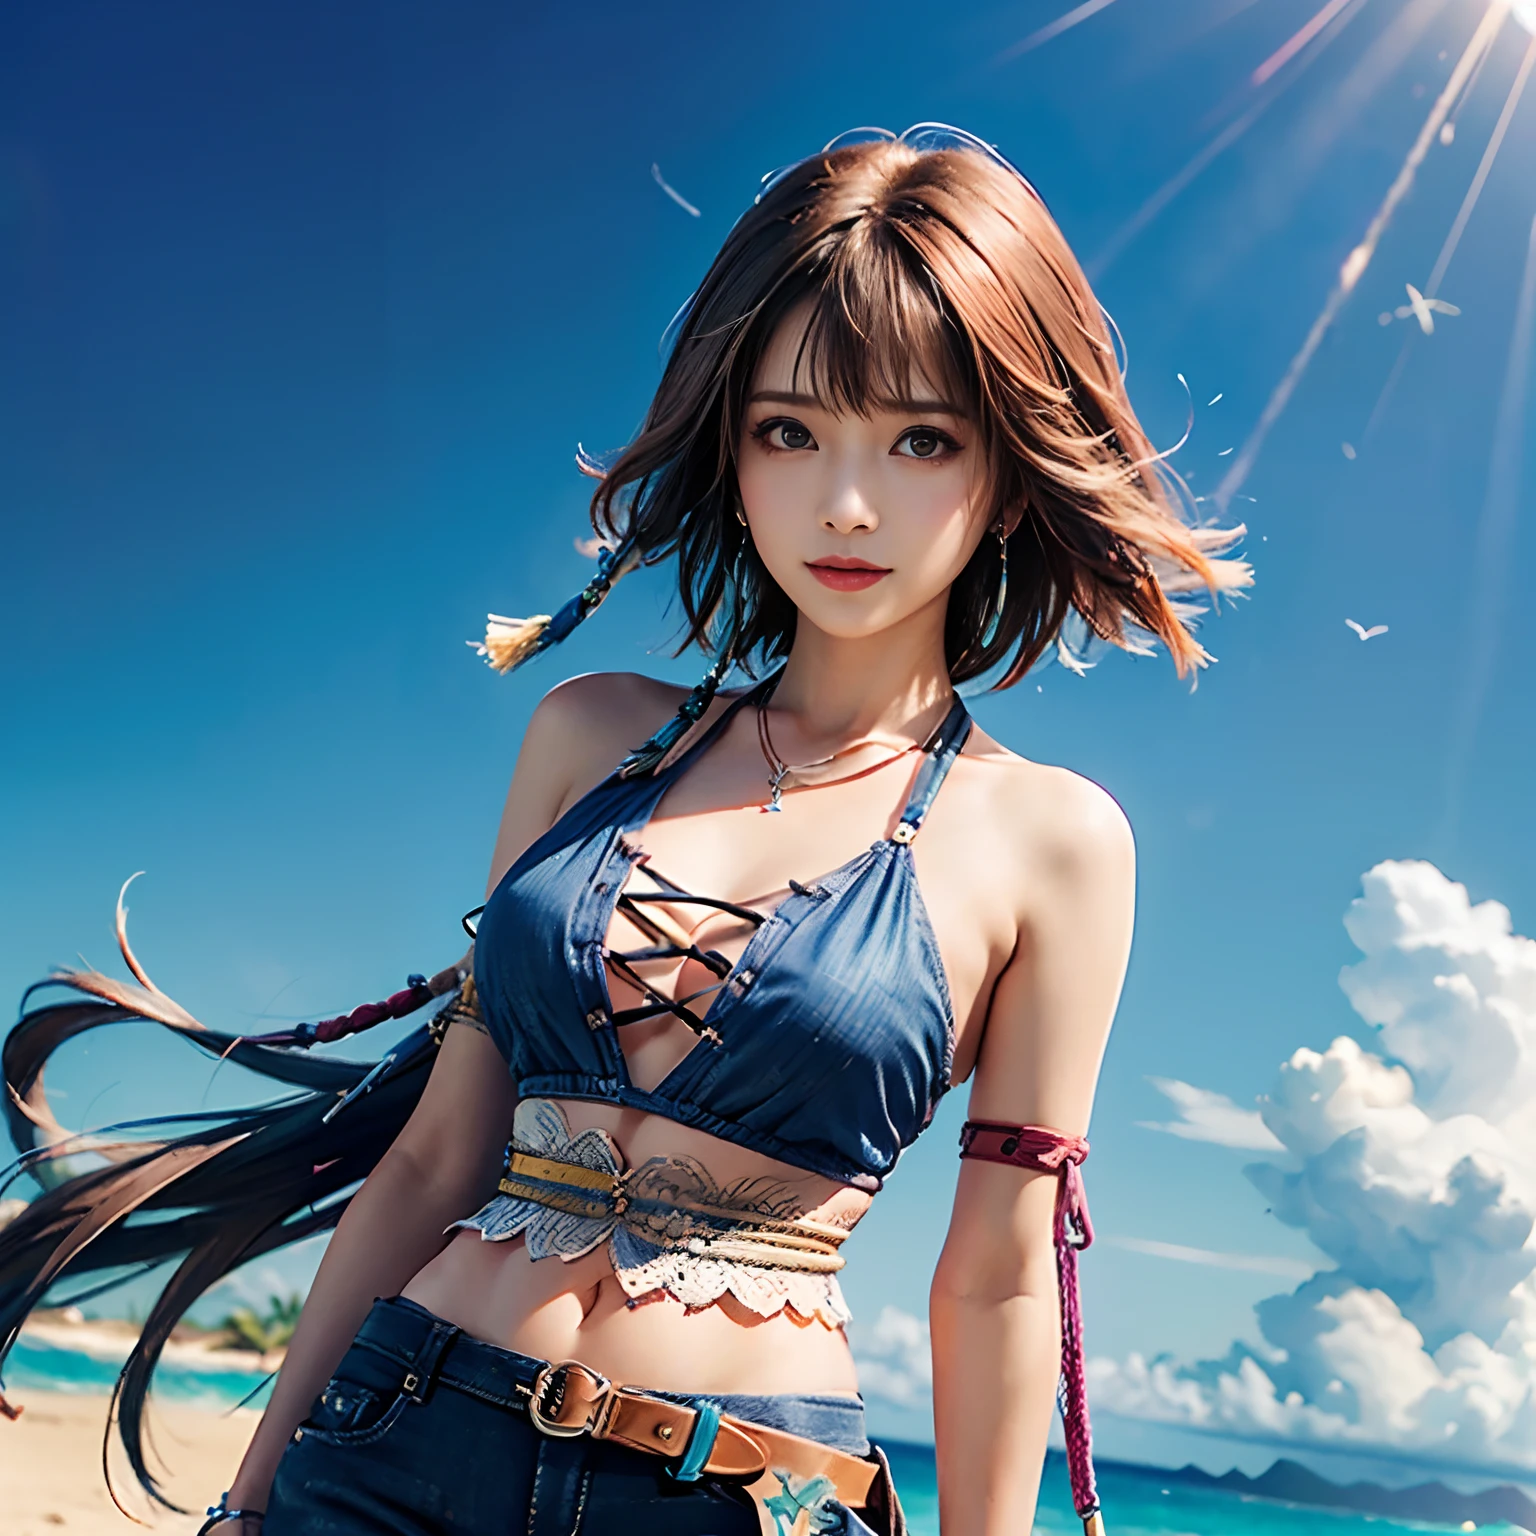 4K,1、Denim Bikini、masutepiece, hight resolution, ultra-detailliert), 1 female, 28 years old, Final Fantasy Yuna x2, More mature, ((Simple background)), Plain dark background, ((There is nothing in the background)), hyper realisitic, Yuna's Final Fantasy Costume, Yuna's original costume design in Final Fantasy X2, (((nffsw://www.Creative Uncut.。.。.com/Gallery-01/FF10 - 2 - Yuna 2...html))), Tattered Exposed Denim Shorts, Features of asymmetrical clothing, Belt on the left hip, Simulation of the best clothes, No collar, 1womanl, Windy nights, Yuna's Bob Hairstyle, busty, cleavage, middle_Breast, thicc body, Smile, Lack of hanging sleeves,, up close shot, full frontal shot, zoomed in shots, Visit HIPS Imagescope, Smile with closed mouth, head to waist, Characters looking at the camera, looking at you, YunaFFX, blue-beaded earring